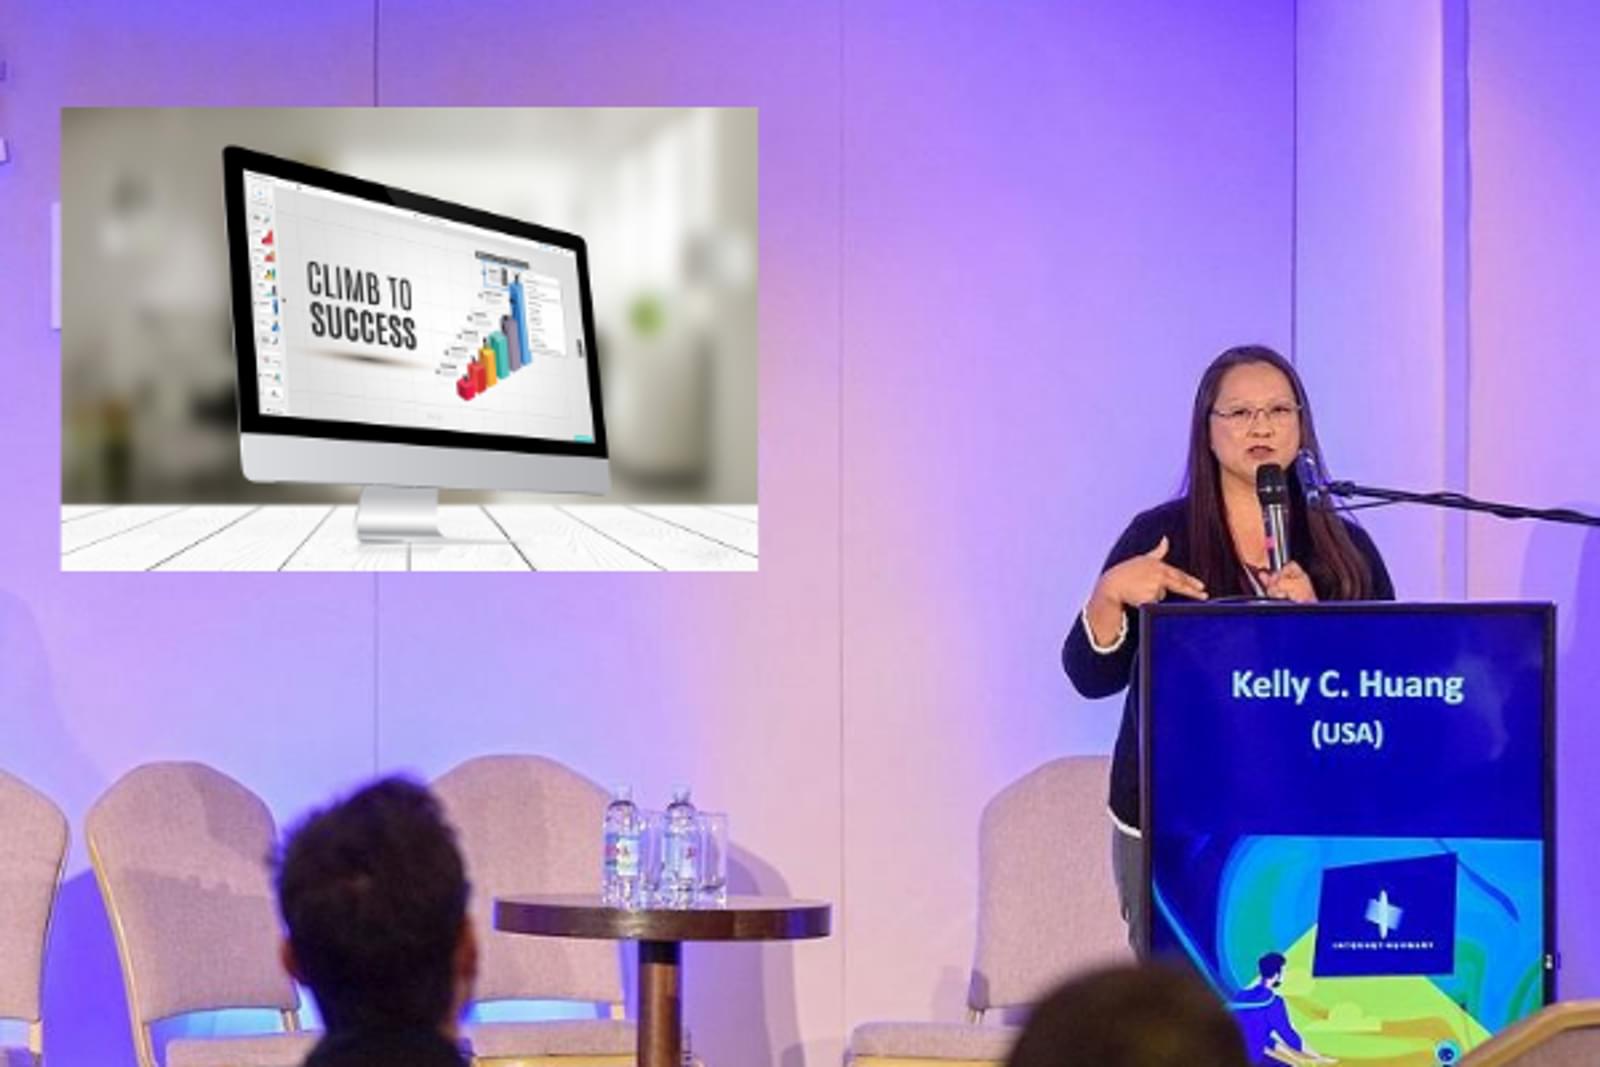 Kelly Huang stands behind a podium in a Conference setting. She is speaking into a microphone and gesturing as she presents to the Conference audience. A screen projected on the Conference wall behind her shows an image and the text "Climb to Success."